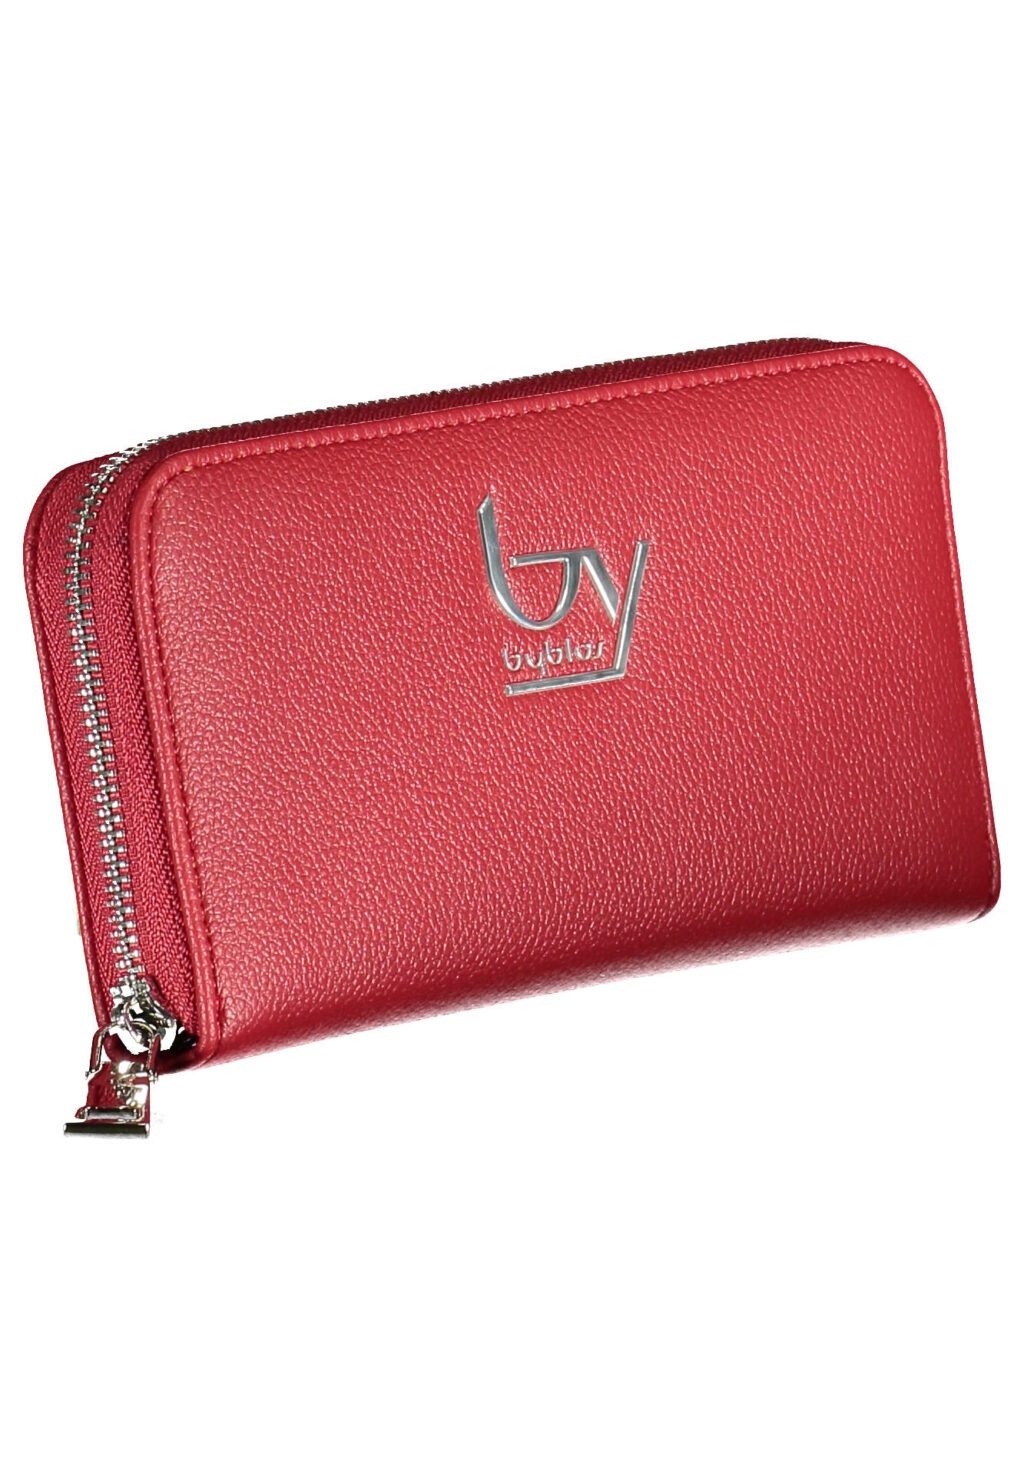 BYBLOS WALLET WOMAN RED 20200017_ROSSO_333-RED